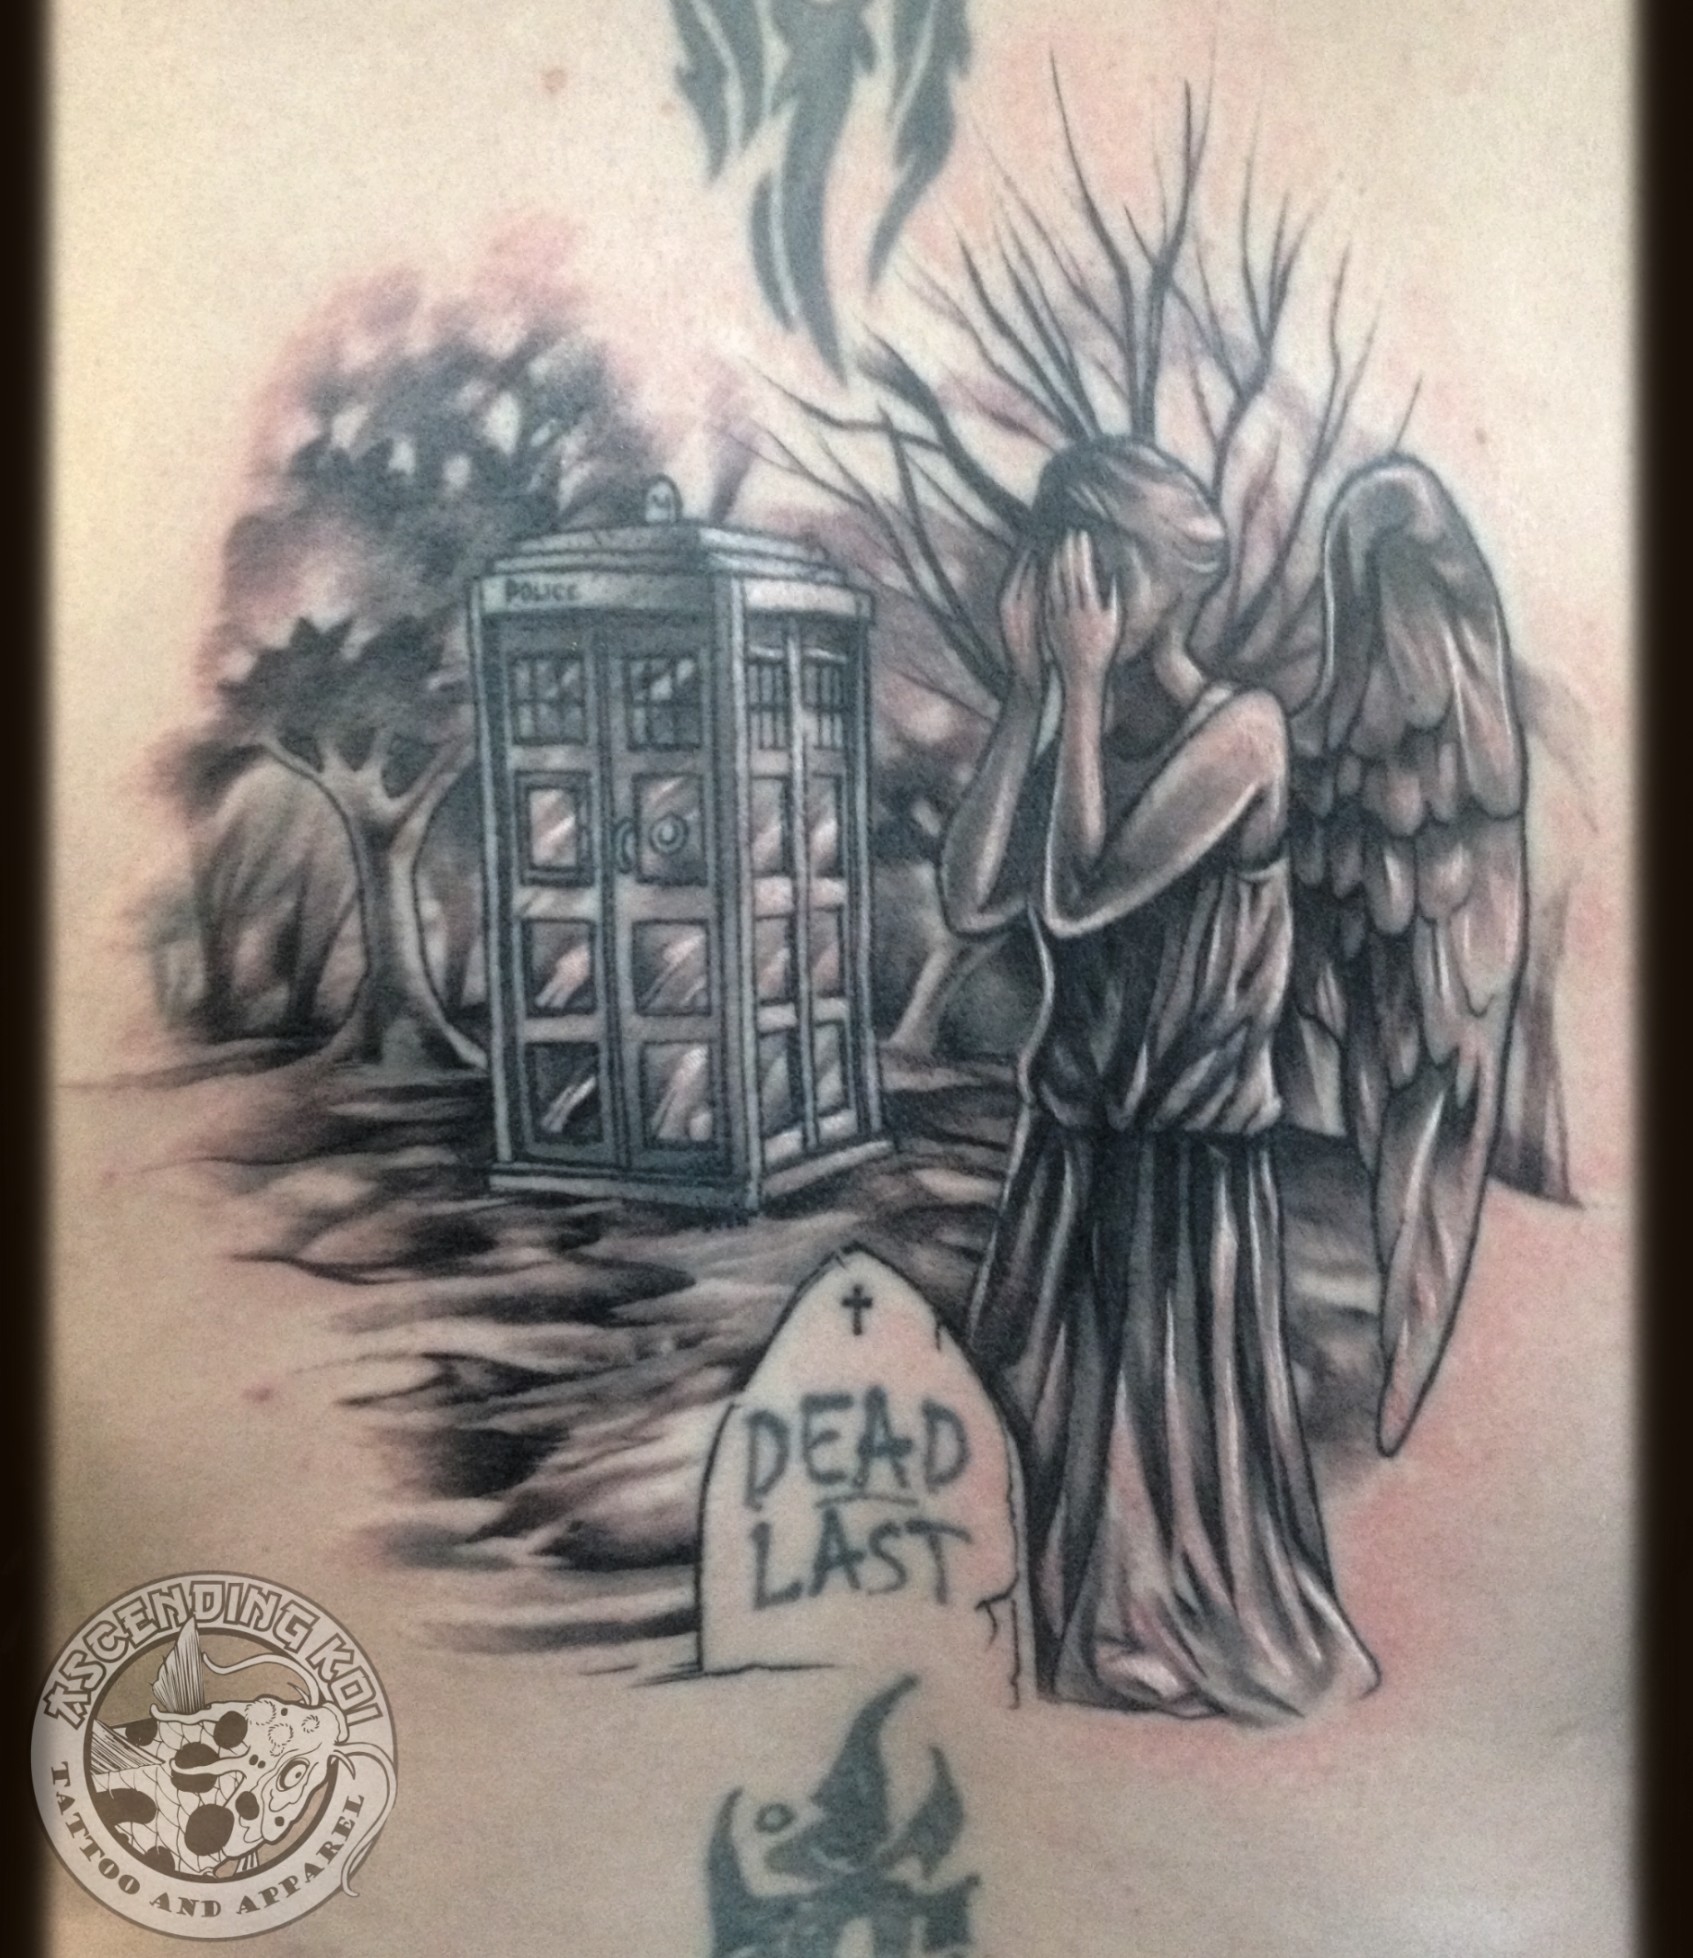 Weeping Angel by Betzy Eaton at Body Art Gallery South Bend Indiana  r tattoos